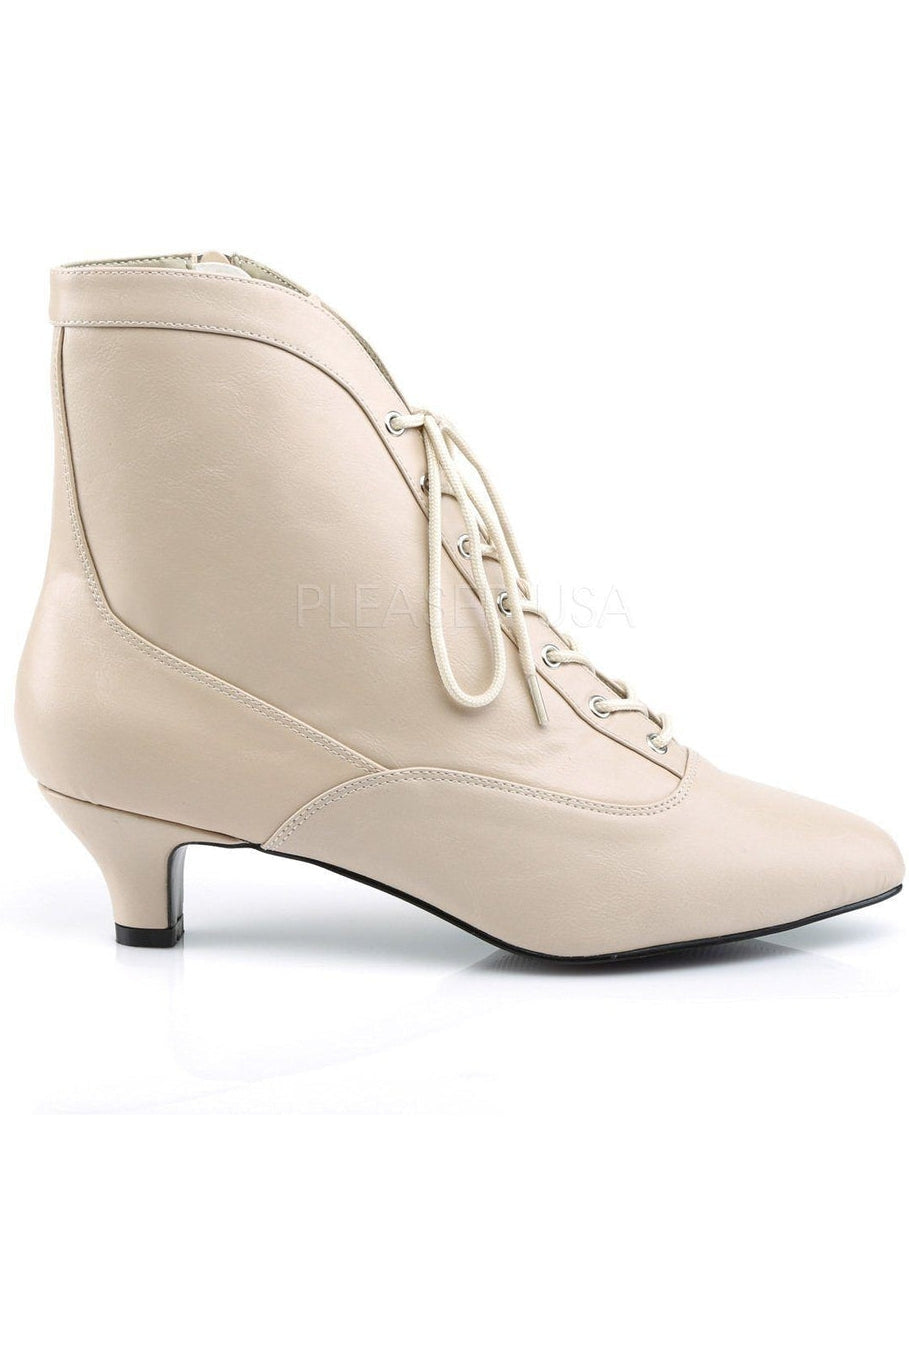 FAB-1005 Ankle Boot | Bone Faux Leather-Pleaser Pink Label-Ankle Boots-SEXYSHOES.COM